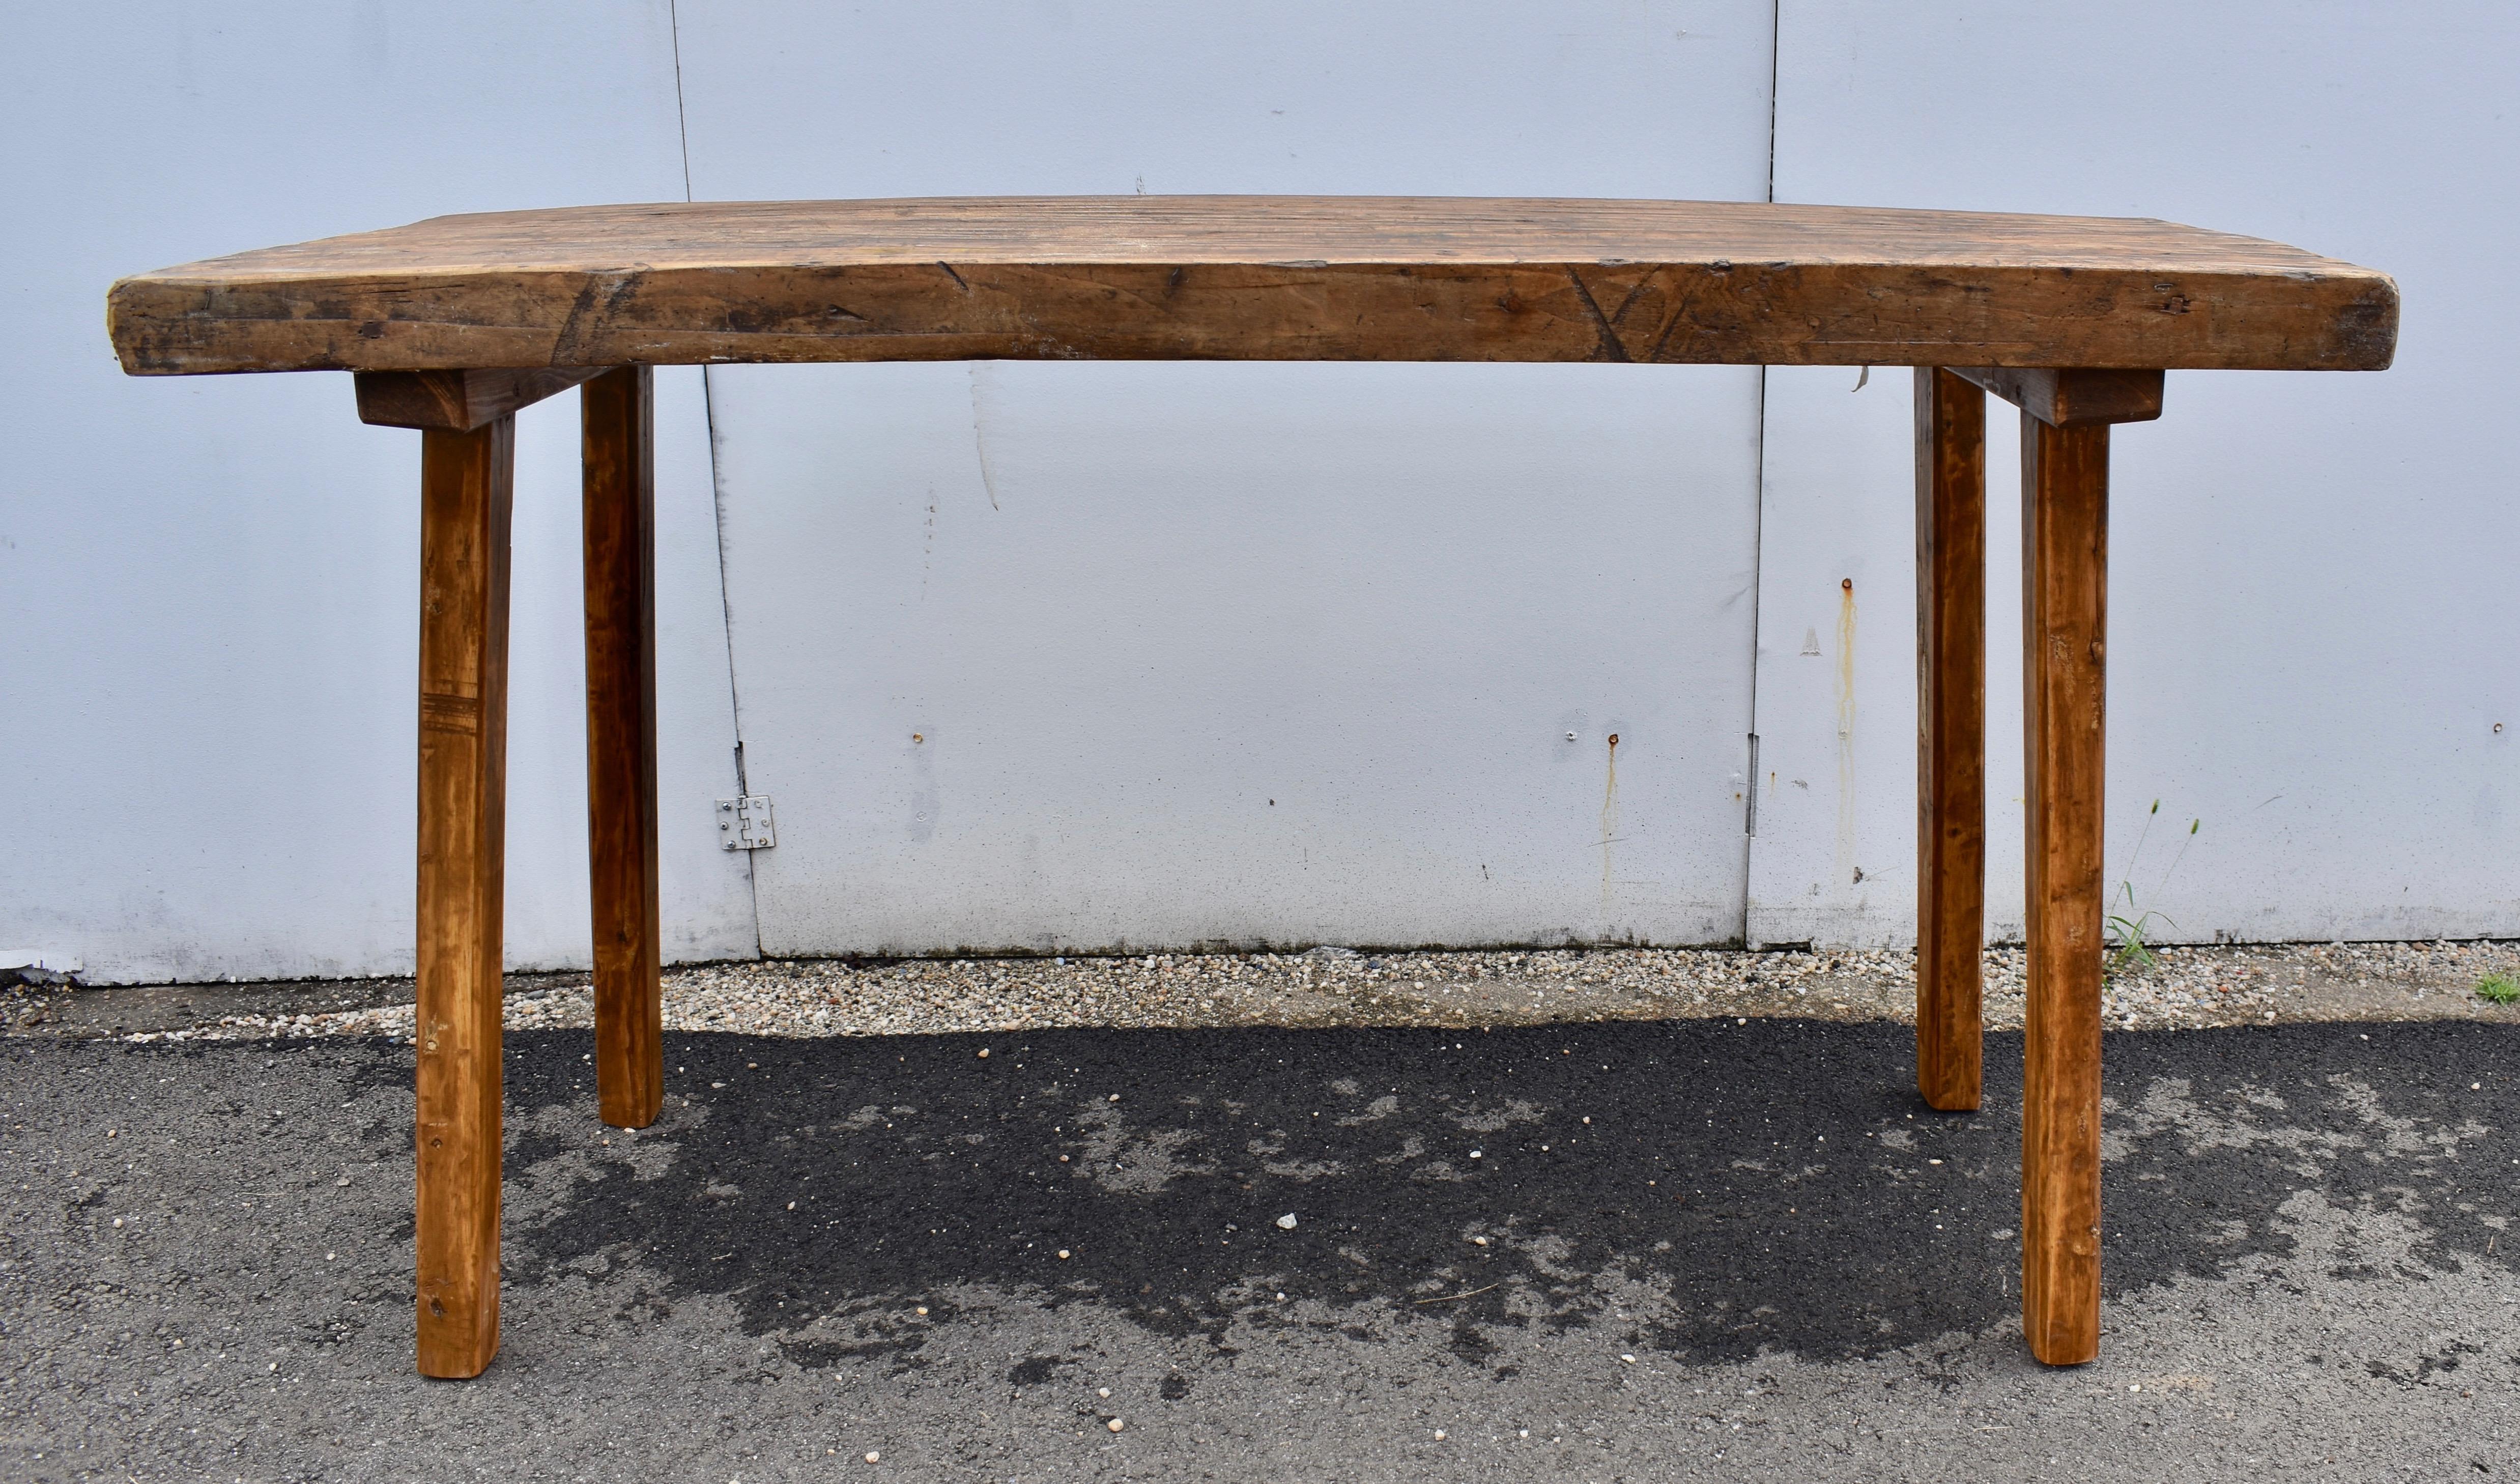 Two slabs of oak almost 3” thick are joined with a spline to form the top of this large Pig Bench.  Square oak legs are chamfered at the corners into octagons, with their tops embedded into cleats, slightly splayed for stability.  The cleats are